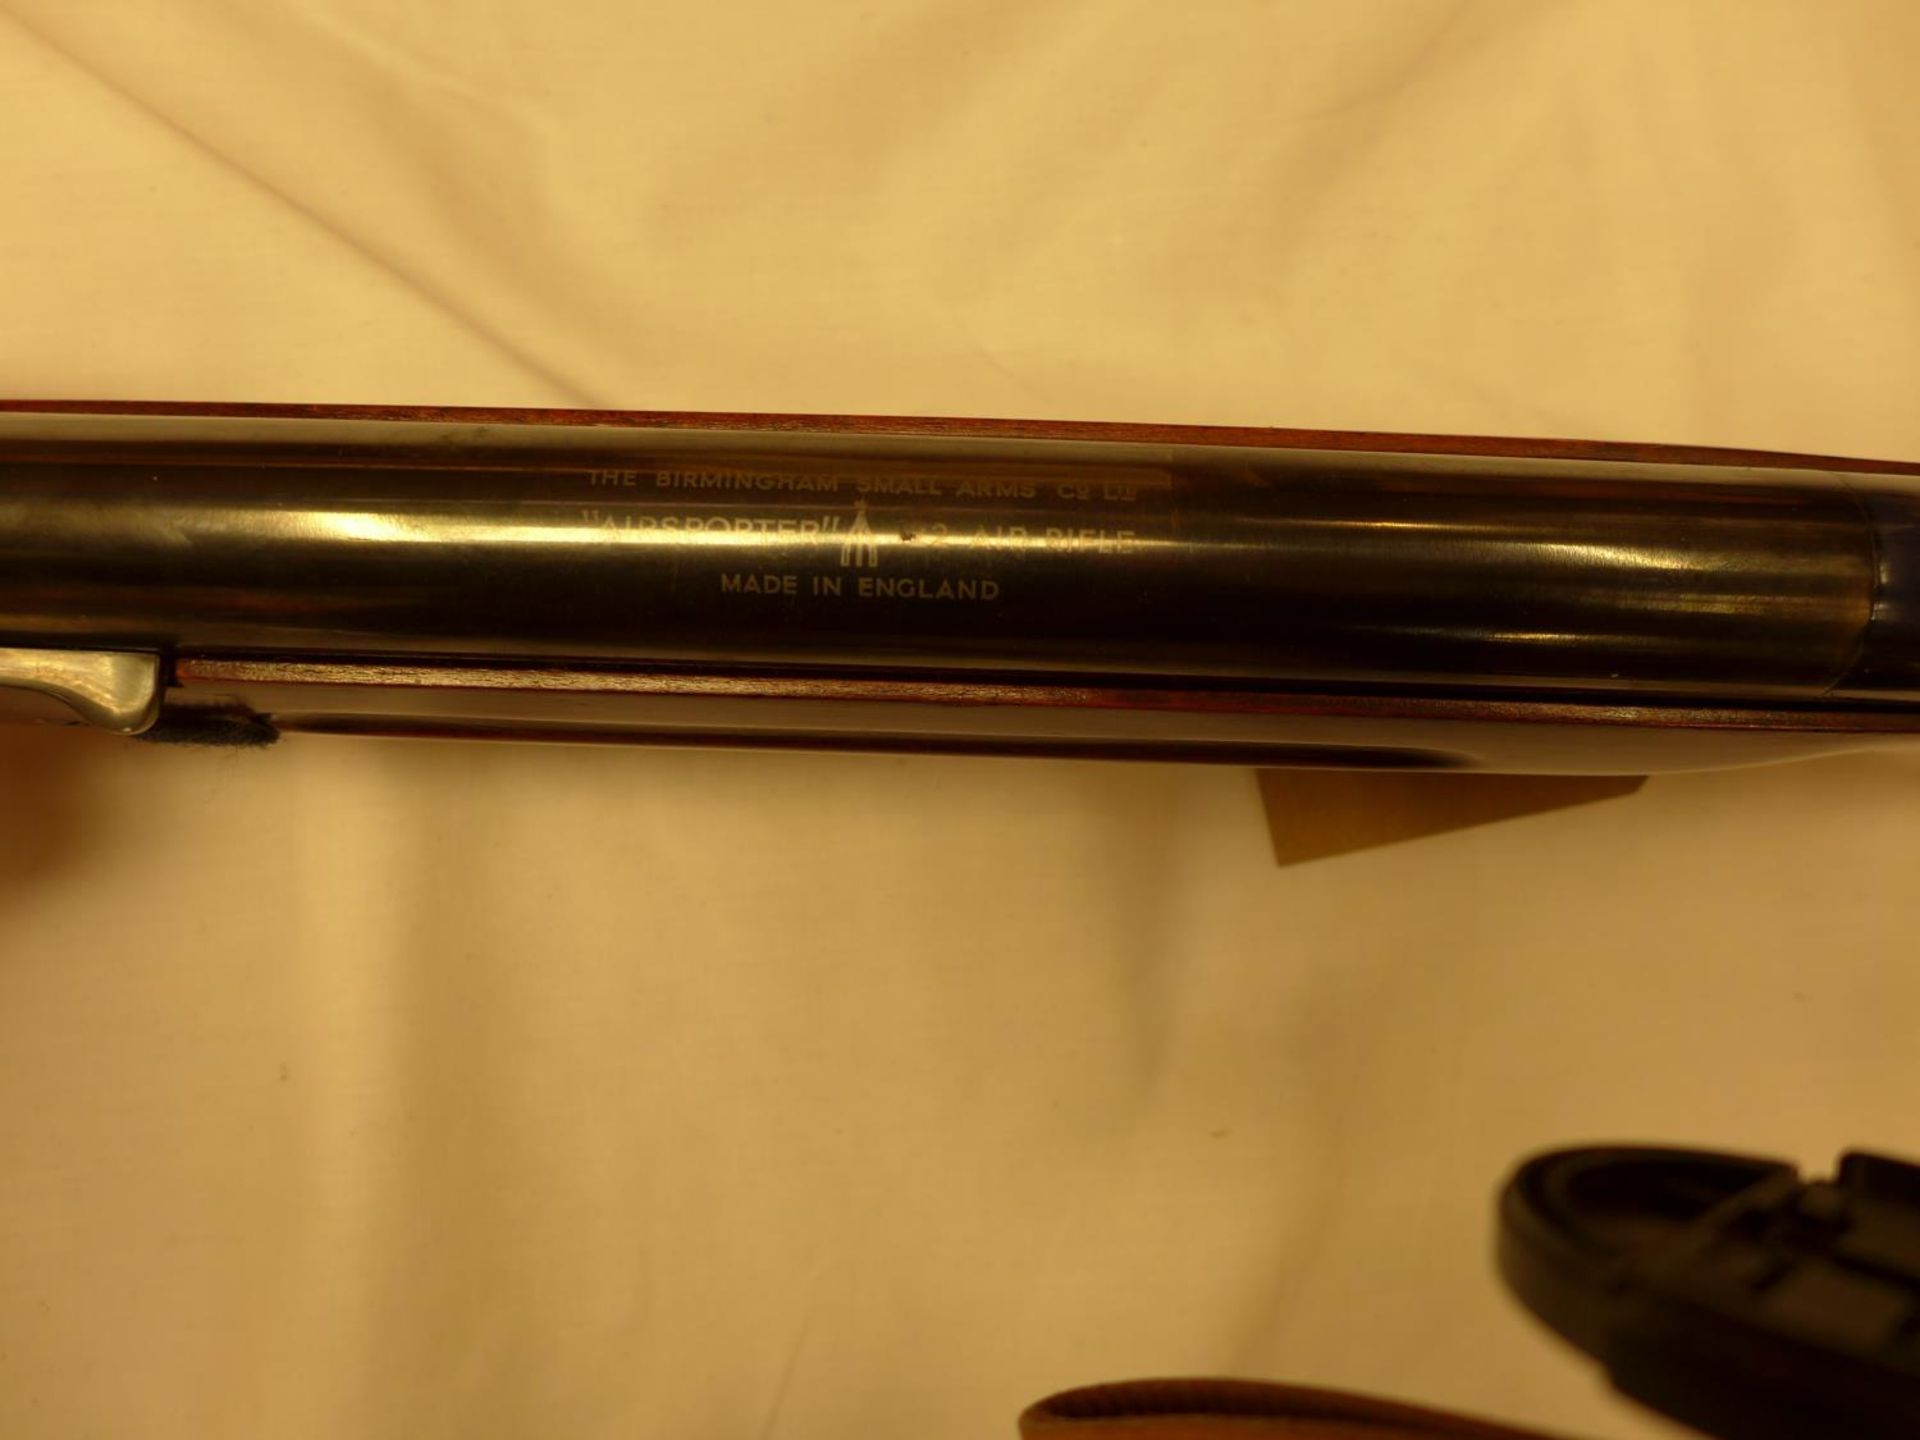 A B.S.A. 'AIRSPORTER' .22 CALBIRE UNDERLEVER AIR RIFLE, 47CM BARREL, WOODEN STOCK - Image 6 of 6